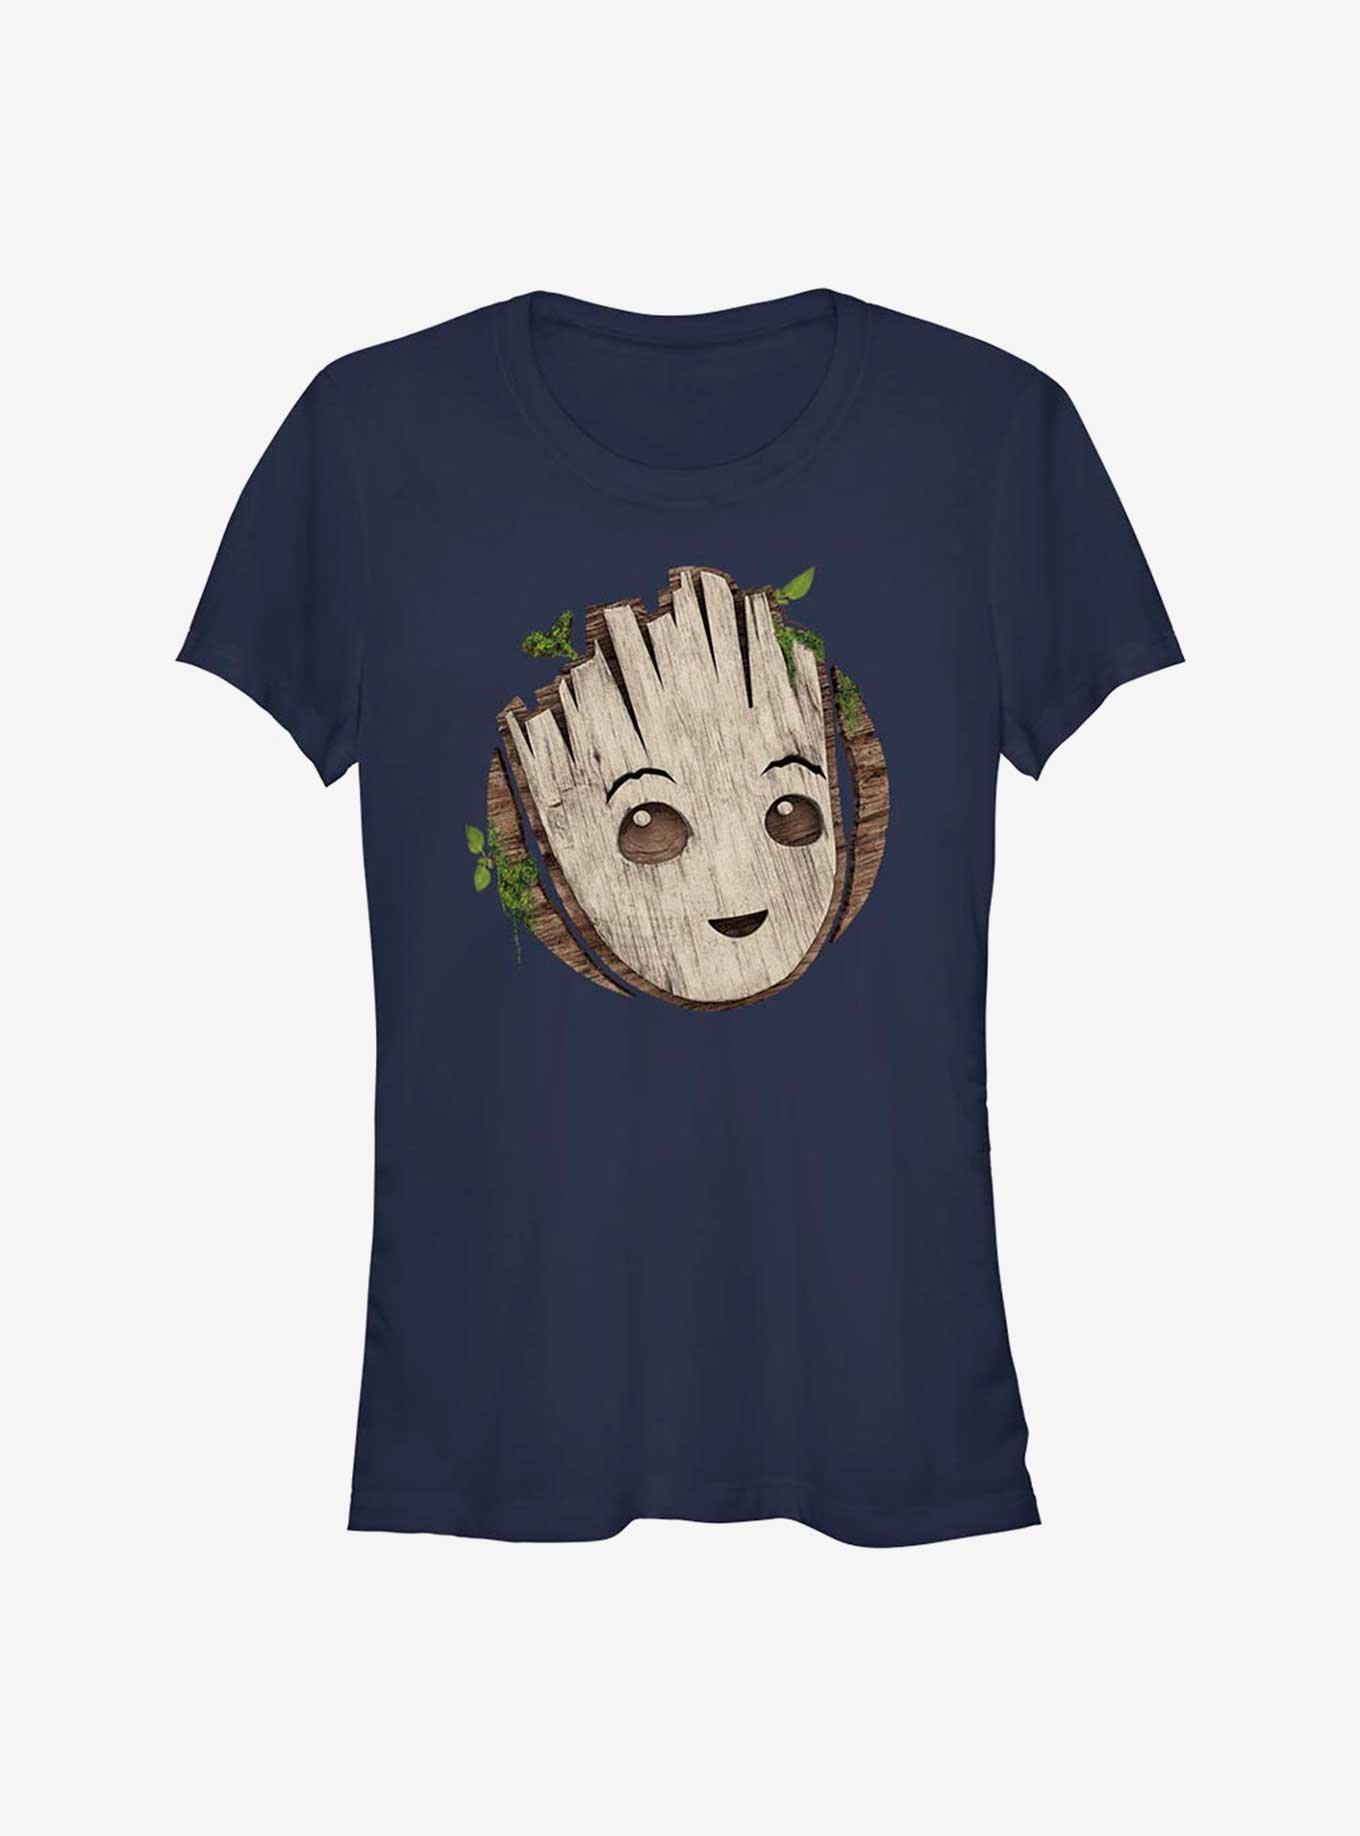 Marvel Guardians of the Galaxy Groot Head Girls T-Shirt, NAVY, hi-res